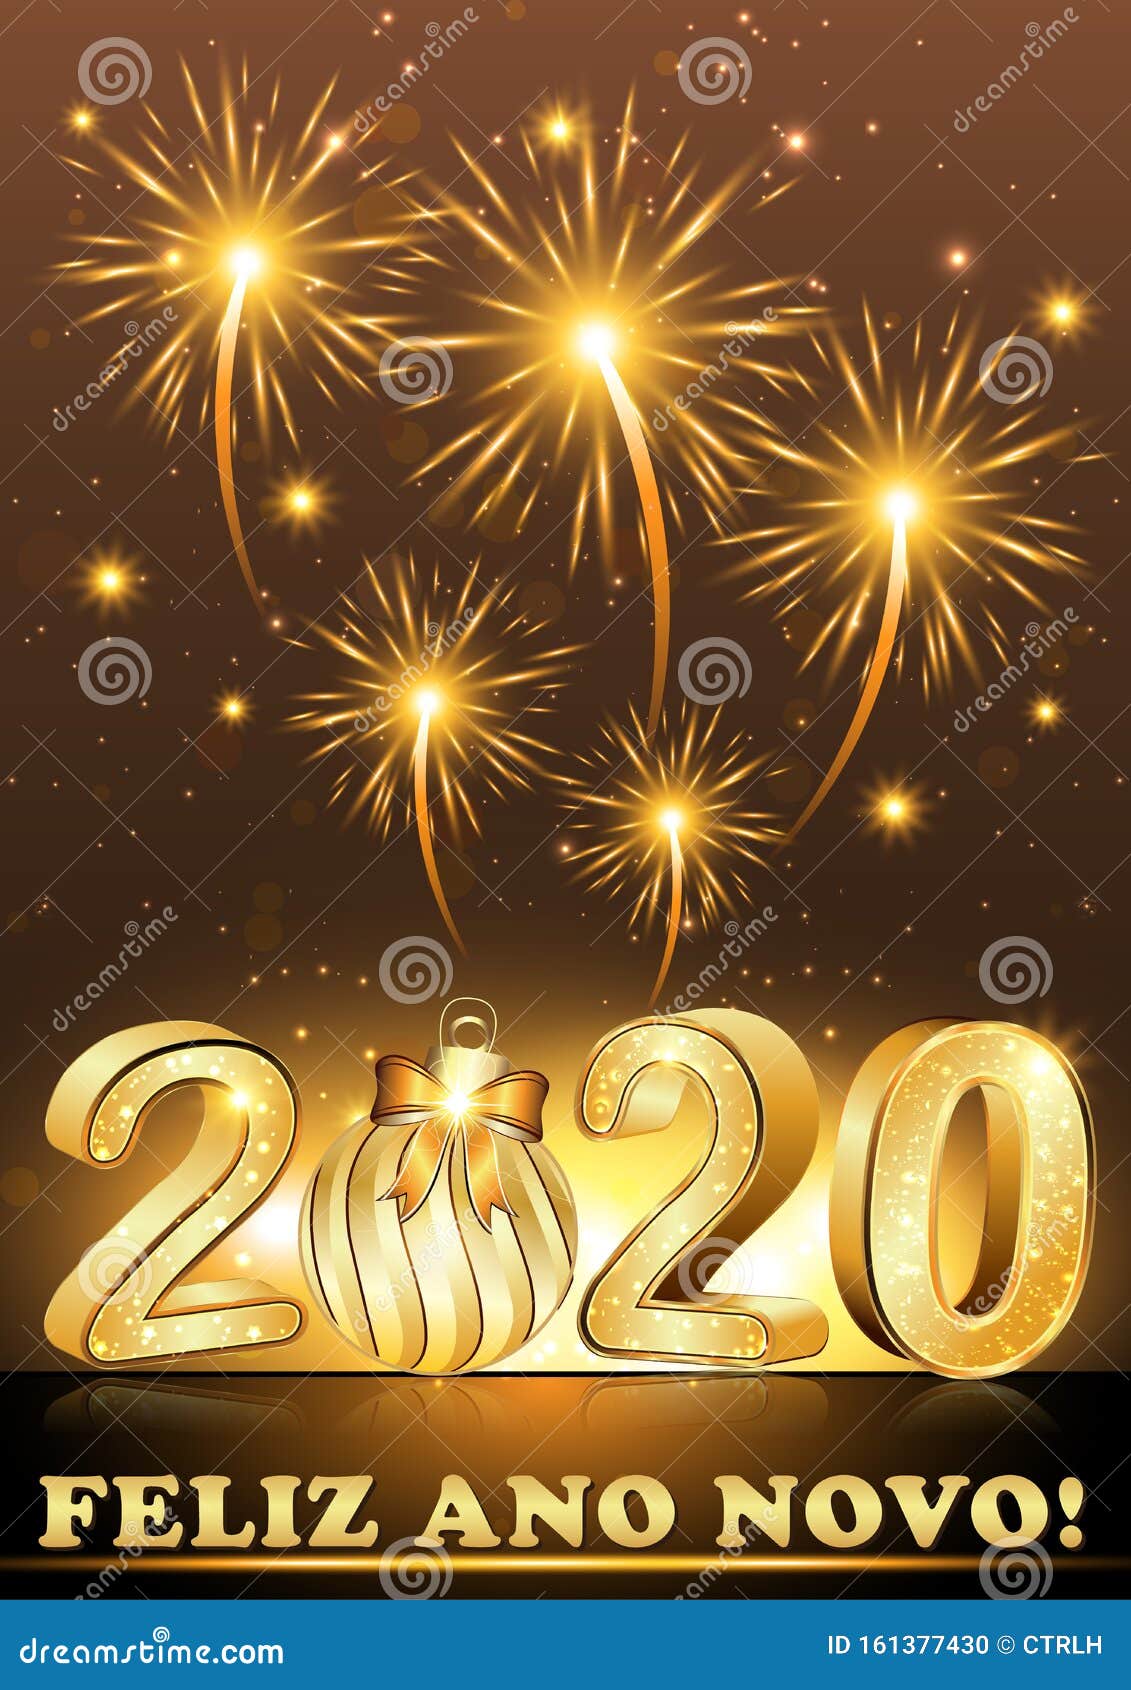 Happy New Year 2020 Written in Portuguese - Greeting Card with ...